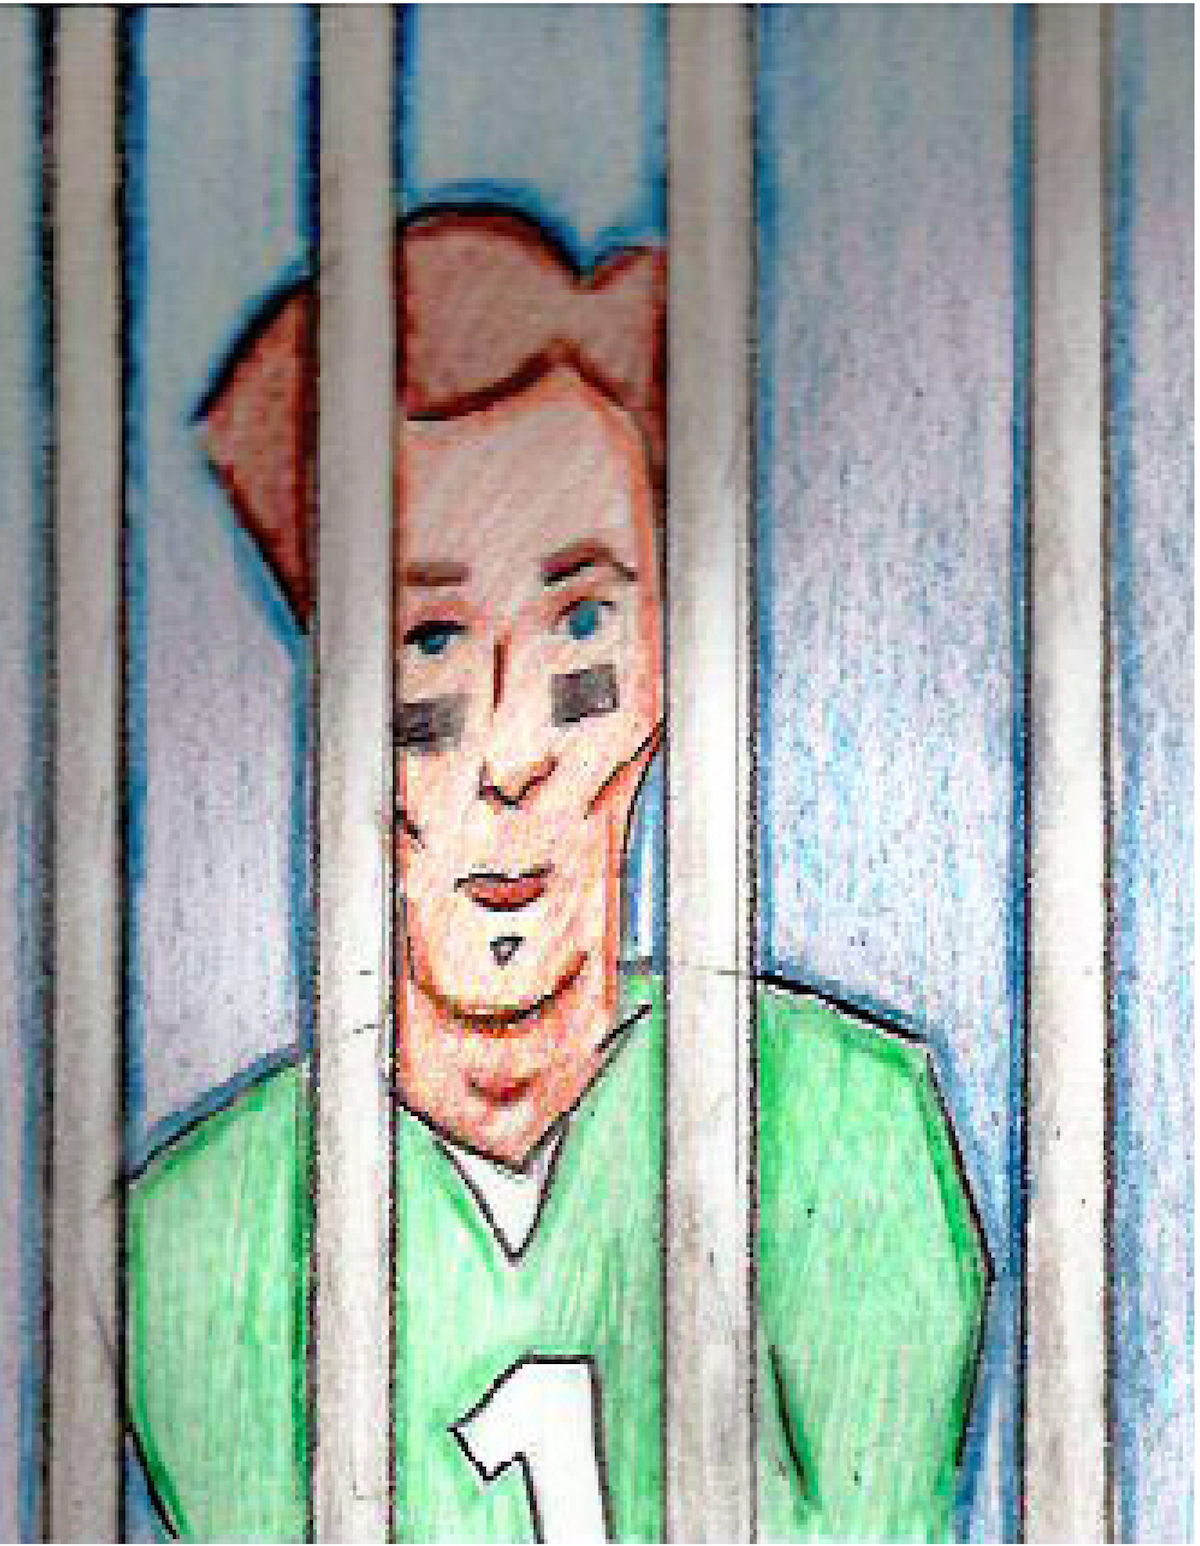 An illustration of a football player, in uniform with a line of black paint under his eyes, behind prison bars.